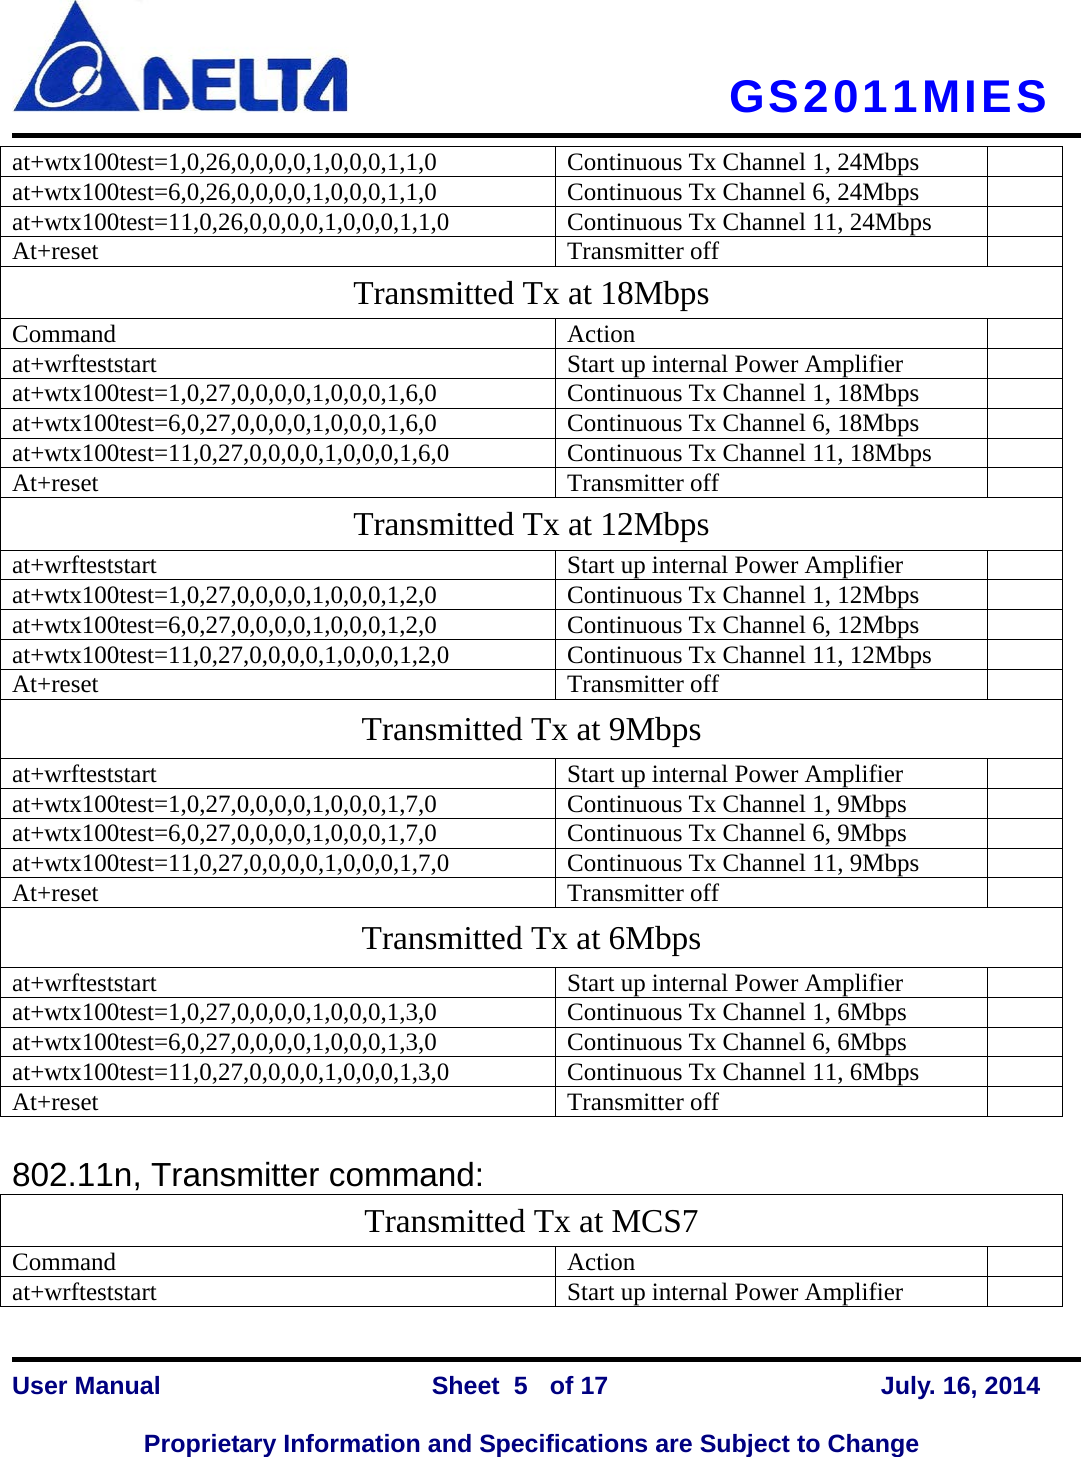     GS2011MIES  at+wtx100test=1,0,26,0,0,0,0,1,0,0,0,1,1,0 Continuous Tx Channel 1, 24Mbps  at+wtx100test=6,0,26,0,0,0,0,1,0,0,0,1,1,0 Continuous Tx Channel 6, 24Mbps  at+wtx100test=11,0,26,0,0,0,0,1,0,0,0,1,1,0 Continuous Tx Channel 11, 24Mbps  At+reset Transmitter off  Transmitted Tx at 18Mbps Command Action  at+wrfteststart Start up internal Power Amplifier  at+wtx100test=1,0,27,0,0,0,0,1,0,0,0,1,6,0 Continuous Tx Channel 1, 18Mbps  at+wtx100test=6,0,27,0,0,0,0,1,0,0,0,1,6,0 Continuous Tx Channel 6, 18Mbps  at+wtx100test=11,0,27,0,0,0,0,1,0,0,0,1,6,0 Continuous Tx Channel 11, 18Mbps  At+reset Transmitter off  Transmitted Tx at 12Mbps at+wrfteststart Start up internal Power Amplifier  at+wtx100test=1,0,27,0,0,0,0,1,0,0,0,1,2,0 Continuous Tx Channel 1, 12Mbps  at+wtx100test=6,0,27,0,0,0,0,1,0,0,0,1,2,0 Continuous Tx Channel 6, 12Mbps  at+wtx100test=11,0,27,0,0,0,0,1,0,0,0,1,2,0 Continuous Tx Channel 11, 12Mbps  At+reset Transmitter off  Transmitted Tx at 9Mbps at+wrfteststart Start up internal Power Amplifier  at+wtx100test=1,0,27,0,0,0,0,1,0,0,0,1,7,0 Continuous Tx Channel 1, 9Mbps  at+wtx100test=6,0,27,0,0,0,0,1,0,0,0,1,7,0 Continuous Tx Channel 6, 9Mbps  at+wtx100test=11,0,27,0,0,0,0,1,0,0,0,1,7,0 Continuous Tx Channel 11, 9Mbps  At+reset Transmitter off  Transmitted Tx at 6Mbps at+wrfteststart Start up internal Power Amplifier  at+wtx100test=1,0,27,0,0,0,0,1,0,0,0,1,3,0 Continuous Tx Channel 1, 6Mbps  at+wtx100test=6,0,27,0,0,0,0,1,0,0,0,1,3,0 Continuous Tx Channel 6, 6Mbps  at+wtx100test=11,0,27,0,0,0,0,1,0,0,0,1,3,0 Continuous Tx Channel 11, 6Mbps  At+reset Transmitter off   802.11n, Transmitter command: Transmitted Tx at MCS7 Command Action  at+wrfteststart Start up internal Power Amplifier    User Manual                Sheet    of 17      July. 16, 2014  Proprietary Information and Specifications are Subject to Change 5 